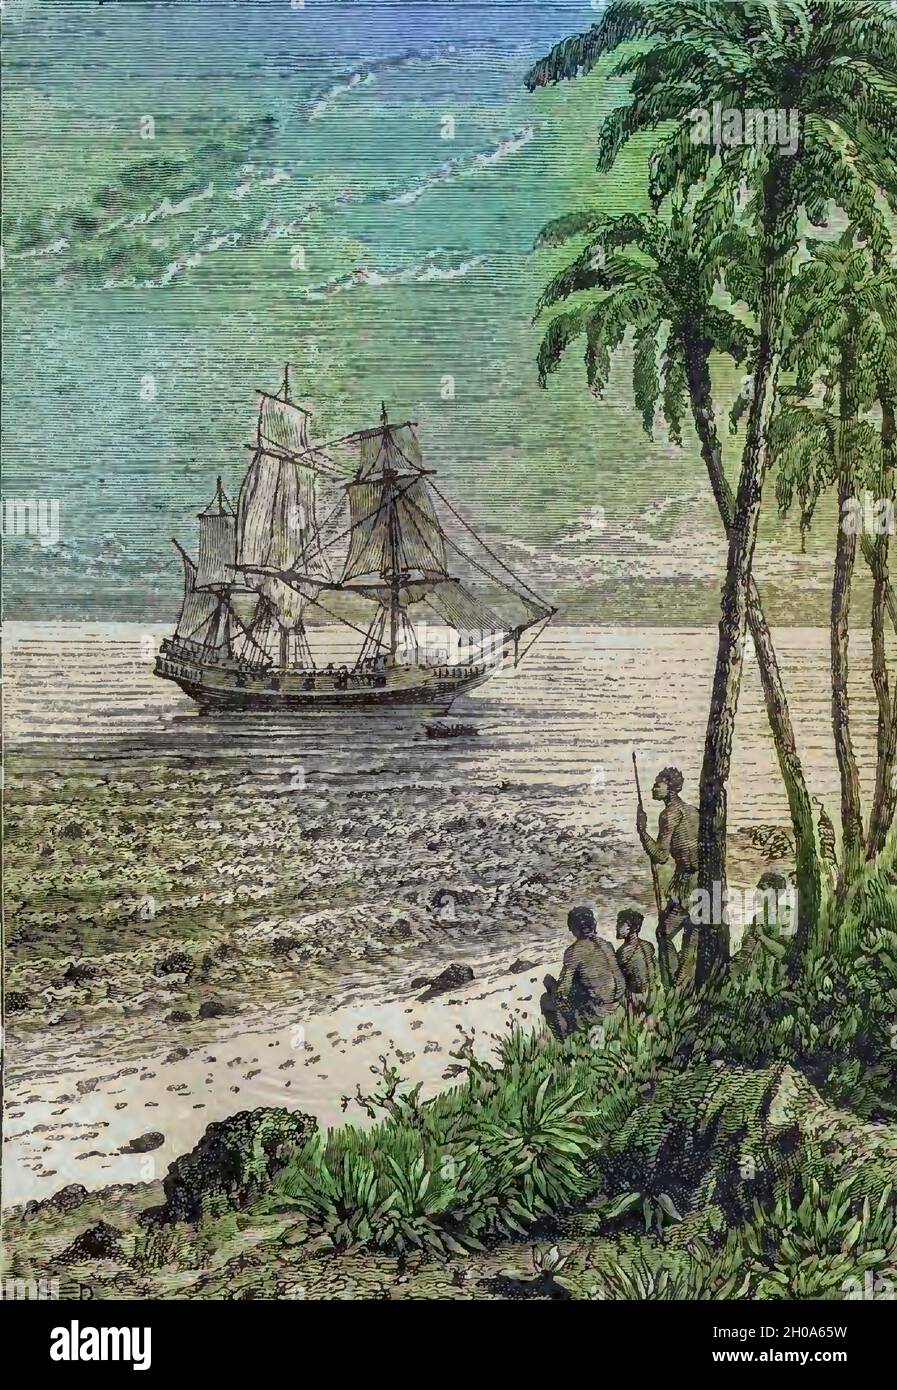 The Bounty Approaching the Shore HMS Bounty, also known as HM Armed Vessel Bounty, was a small merchant vessel that the Royal Navy purchased in 1787 for a botanical mission. The ship was sent to the South Pacific Ocean under the command of William Bligh to acquire breadfruit plants and transport them to the West Indies. That mission was never completed owing to a 1789 mutiny led by acting lieutenant Fletcher Christian, an incident now popularly known as the mutiny on the Bounty. The mutineers later burned Bounty while she was moored at Pitcairn Island. Stock Photo